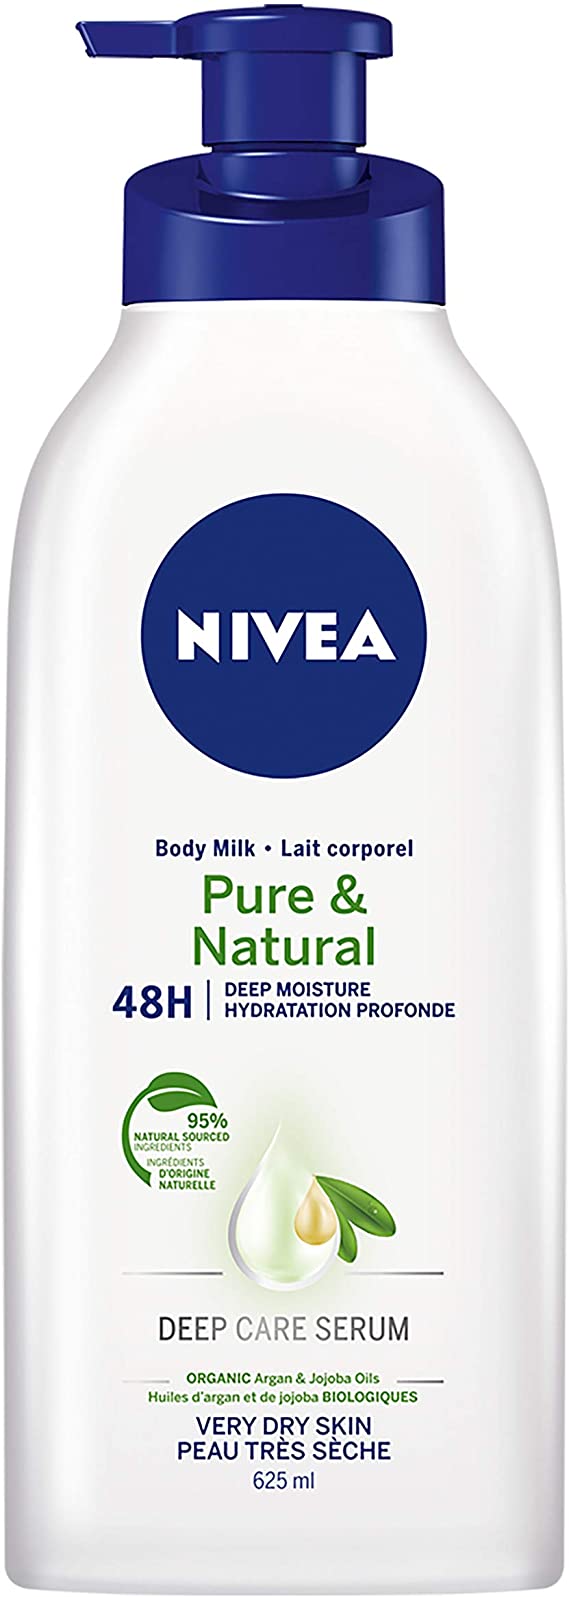 NIVEA Pure & Natural Deep Moisture Body Milk (625ml), Skin Lotion Enriched with Argan Oil & Jojoba Oil, Body Cream for 48H of Noticeably Smoother Skin